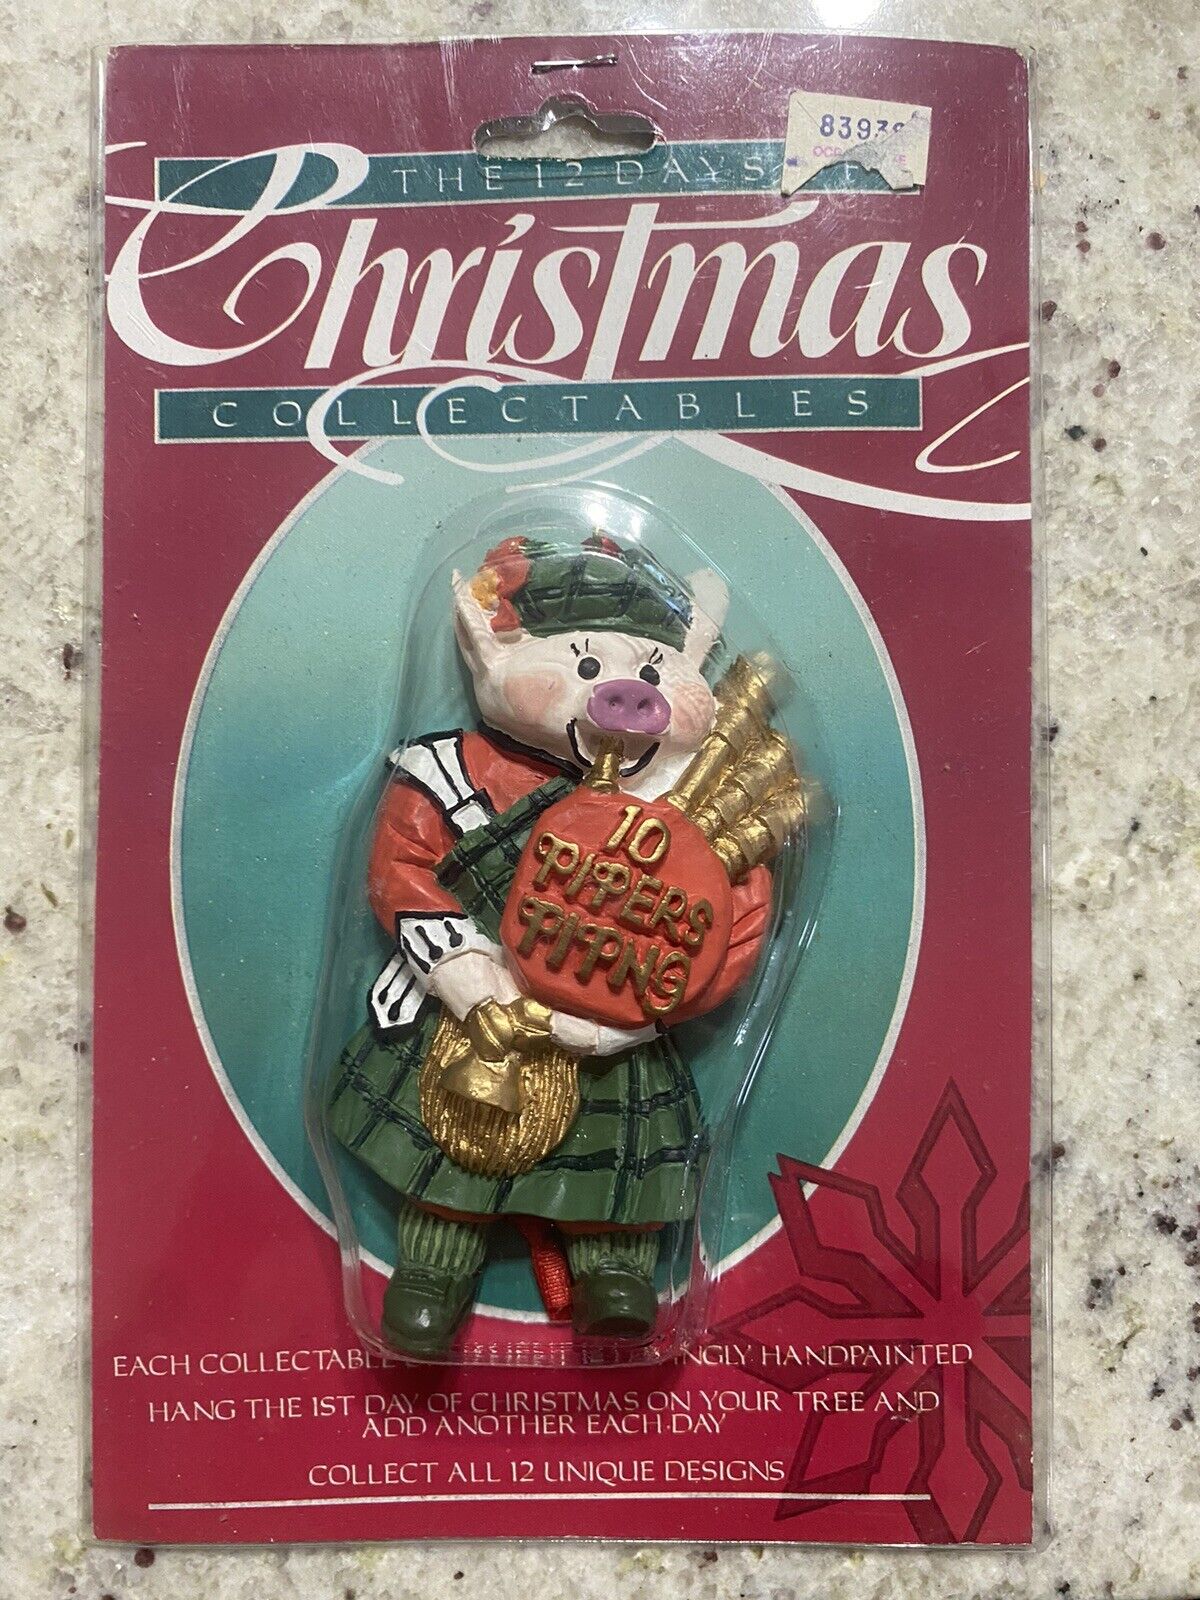 New Vintage Giny Inc. The 12 Days Of Christmas Collectible Christmas ornament